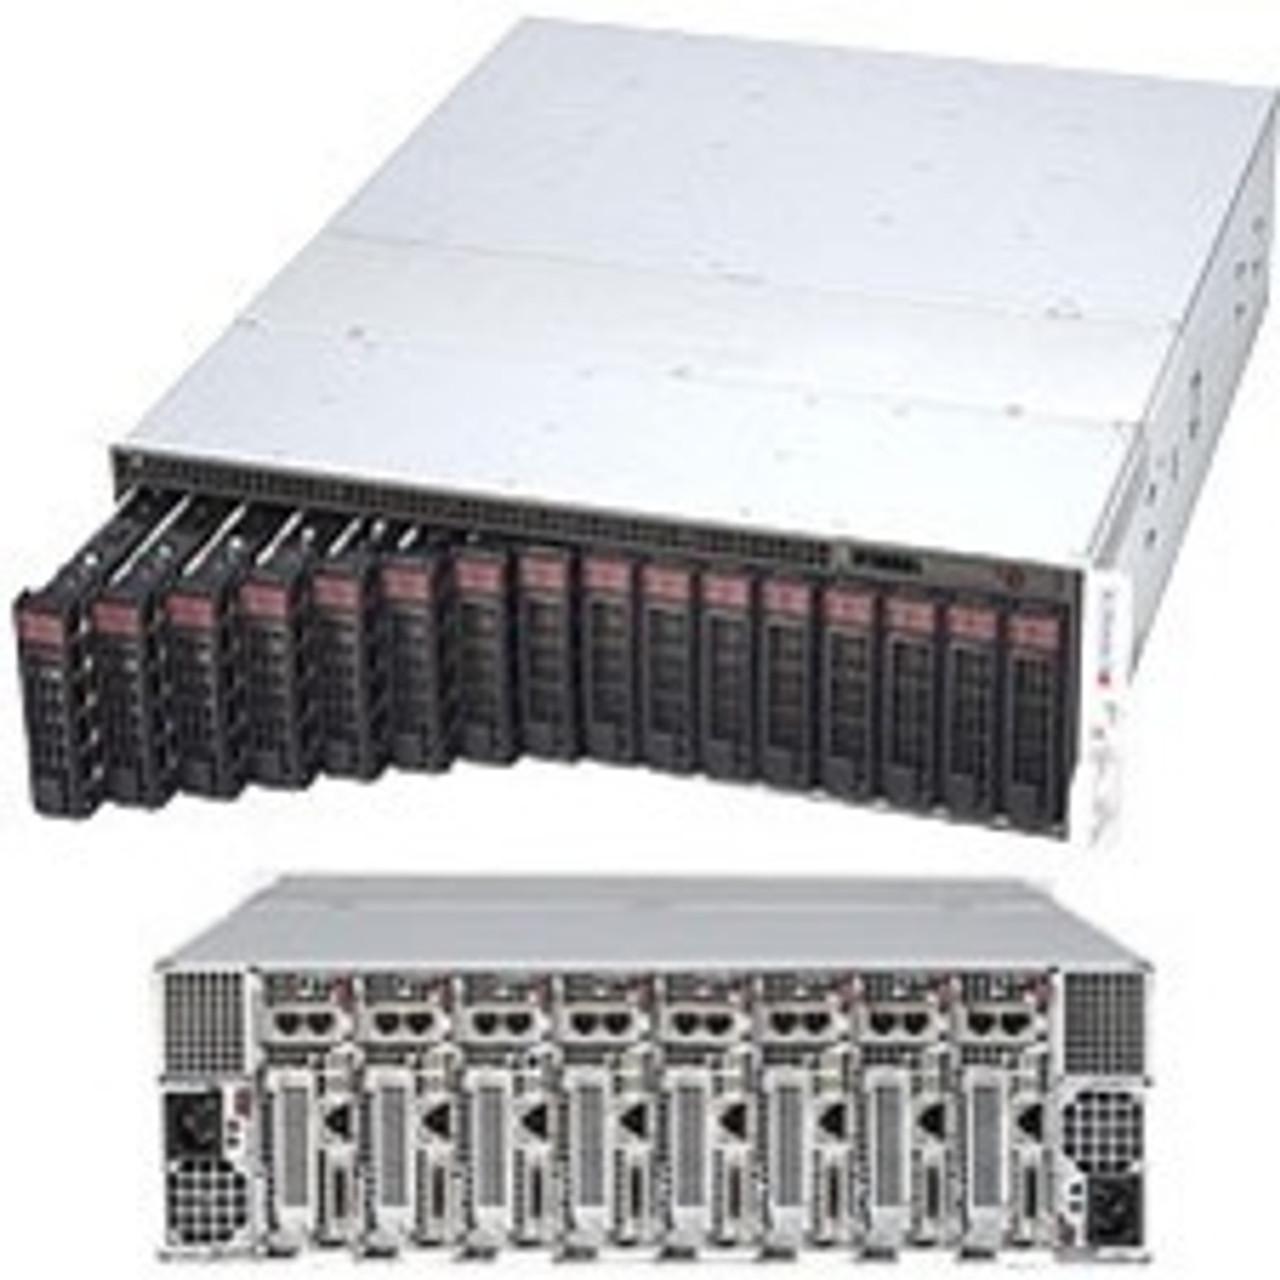 Supermicro SYS-5039MS-H8TRF